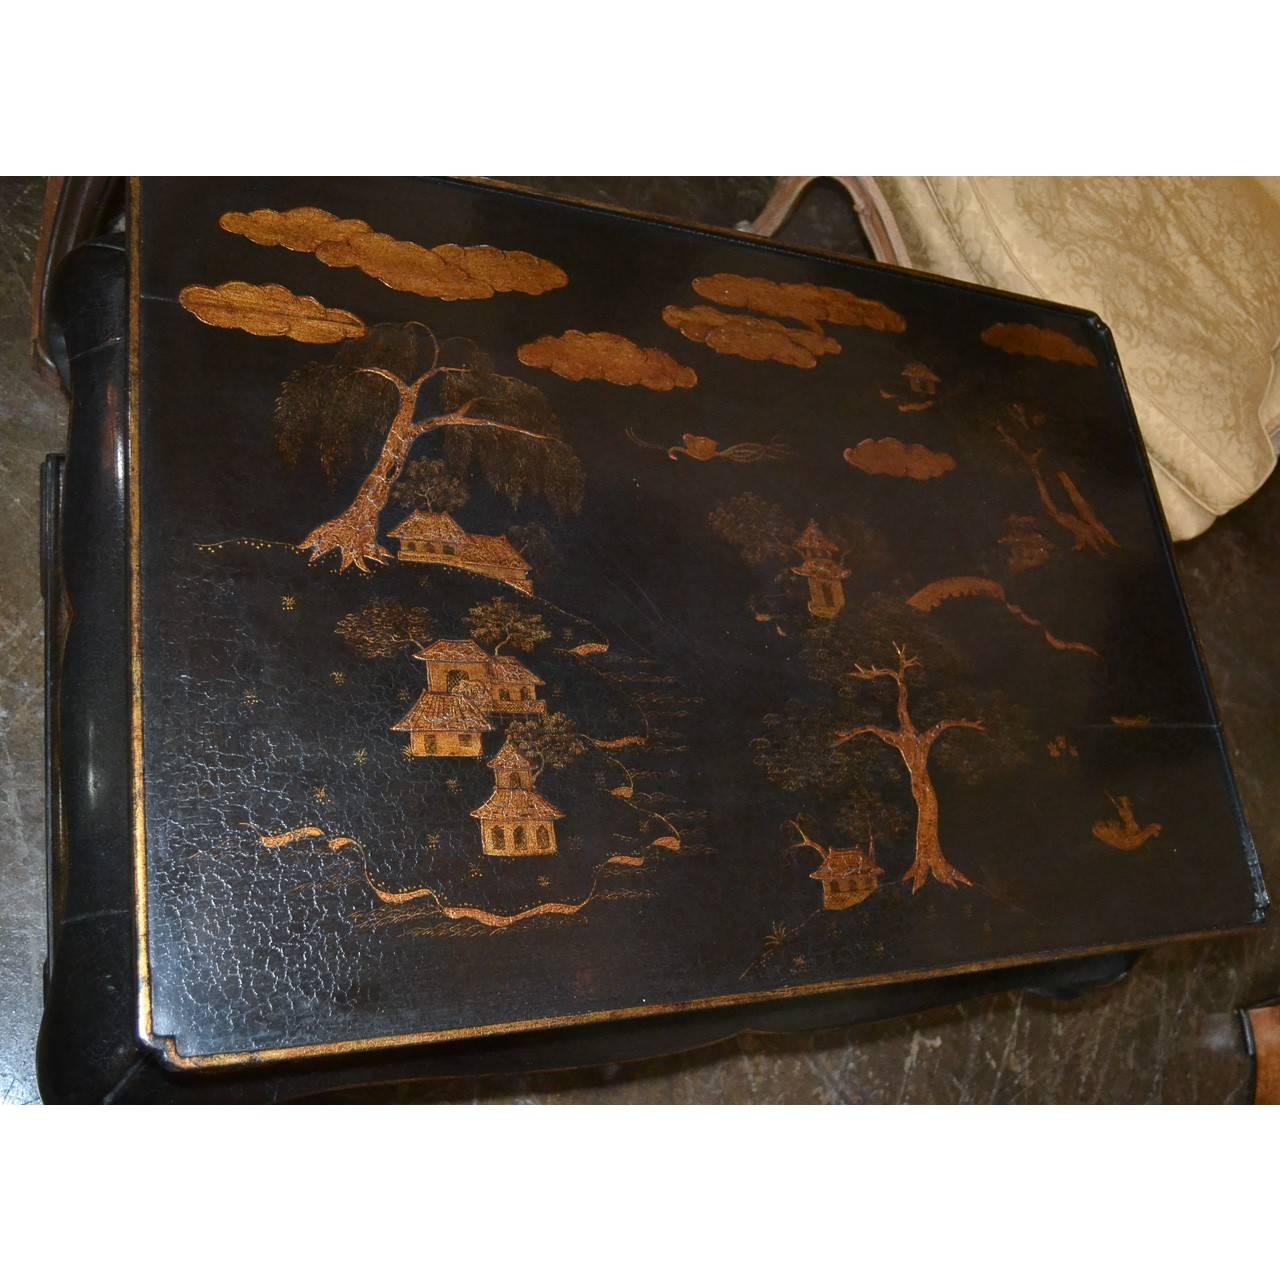 Exceptional Italian black and gold lacquered coffee or cocktail table on cabriole legs and lower tier, circa 1910. The Chinese chinoiserie decorated top with a beautiful river and landscape scene with floating clouds above pagodas, large trees and